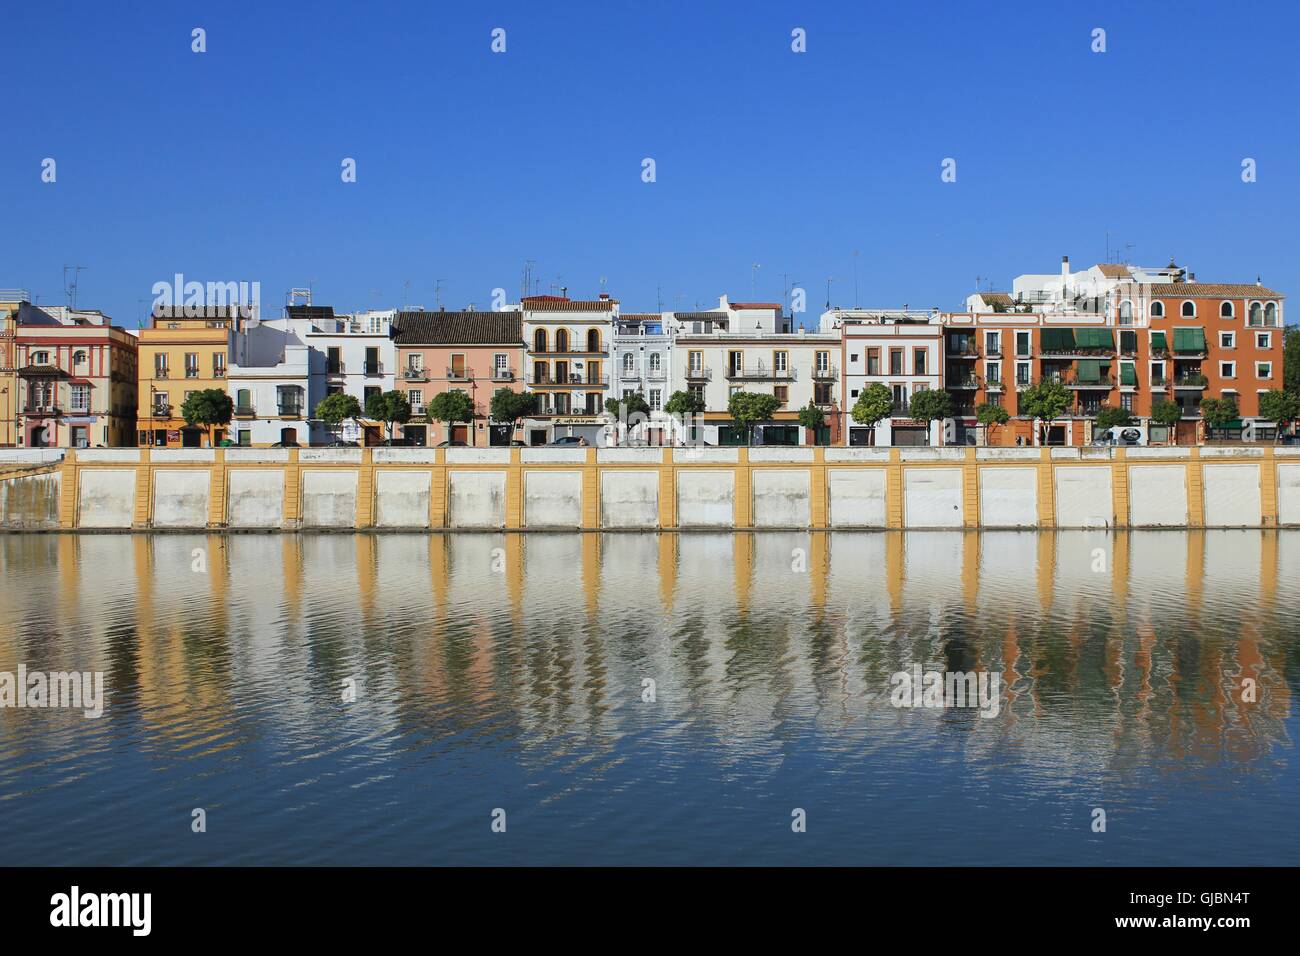 Landscape of an old city with low-rise buildings in the river coast. Guadalquivir River, Seville, Spain. Stock Photo